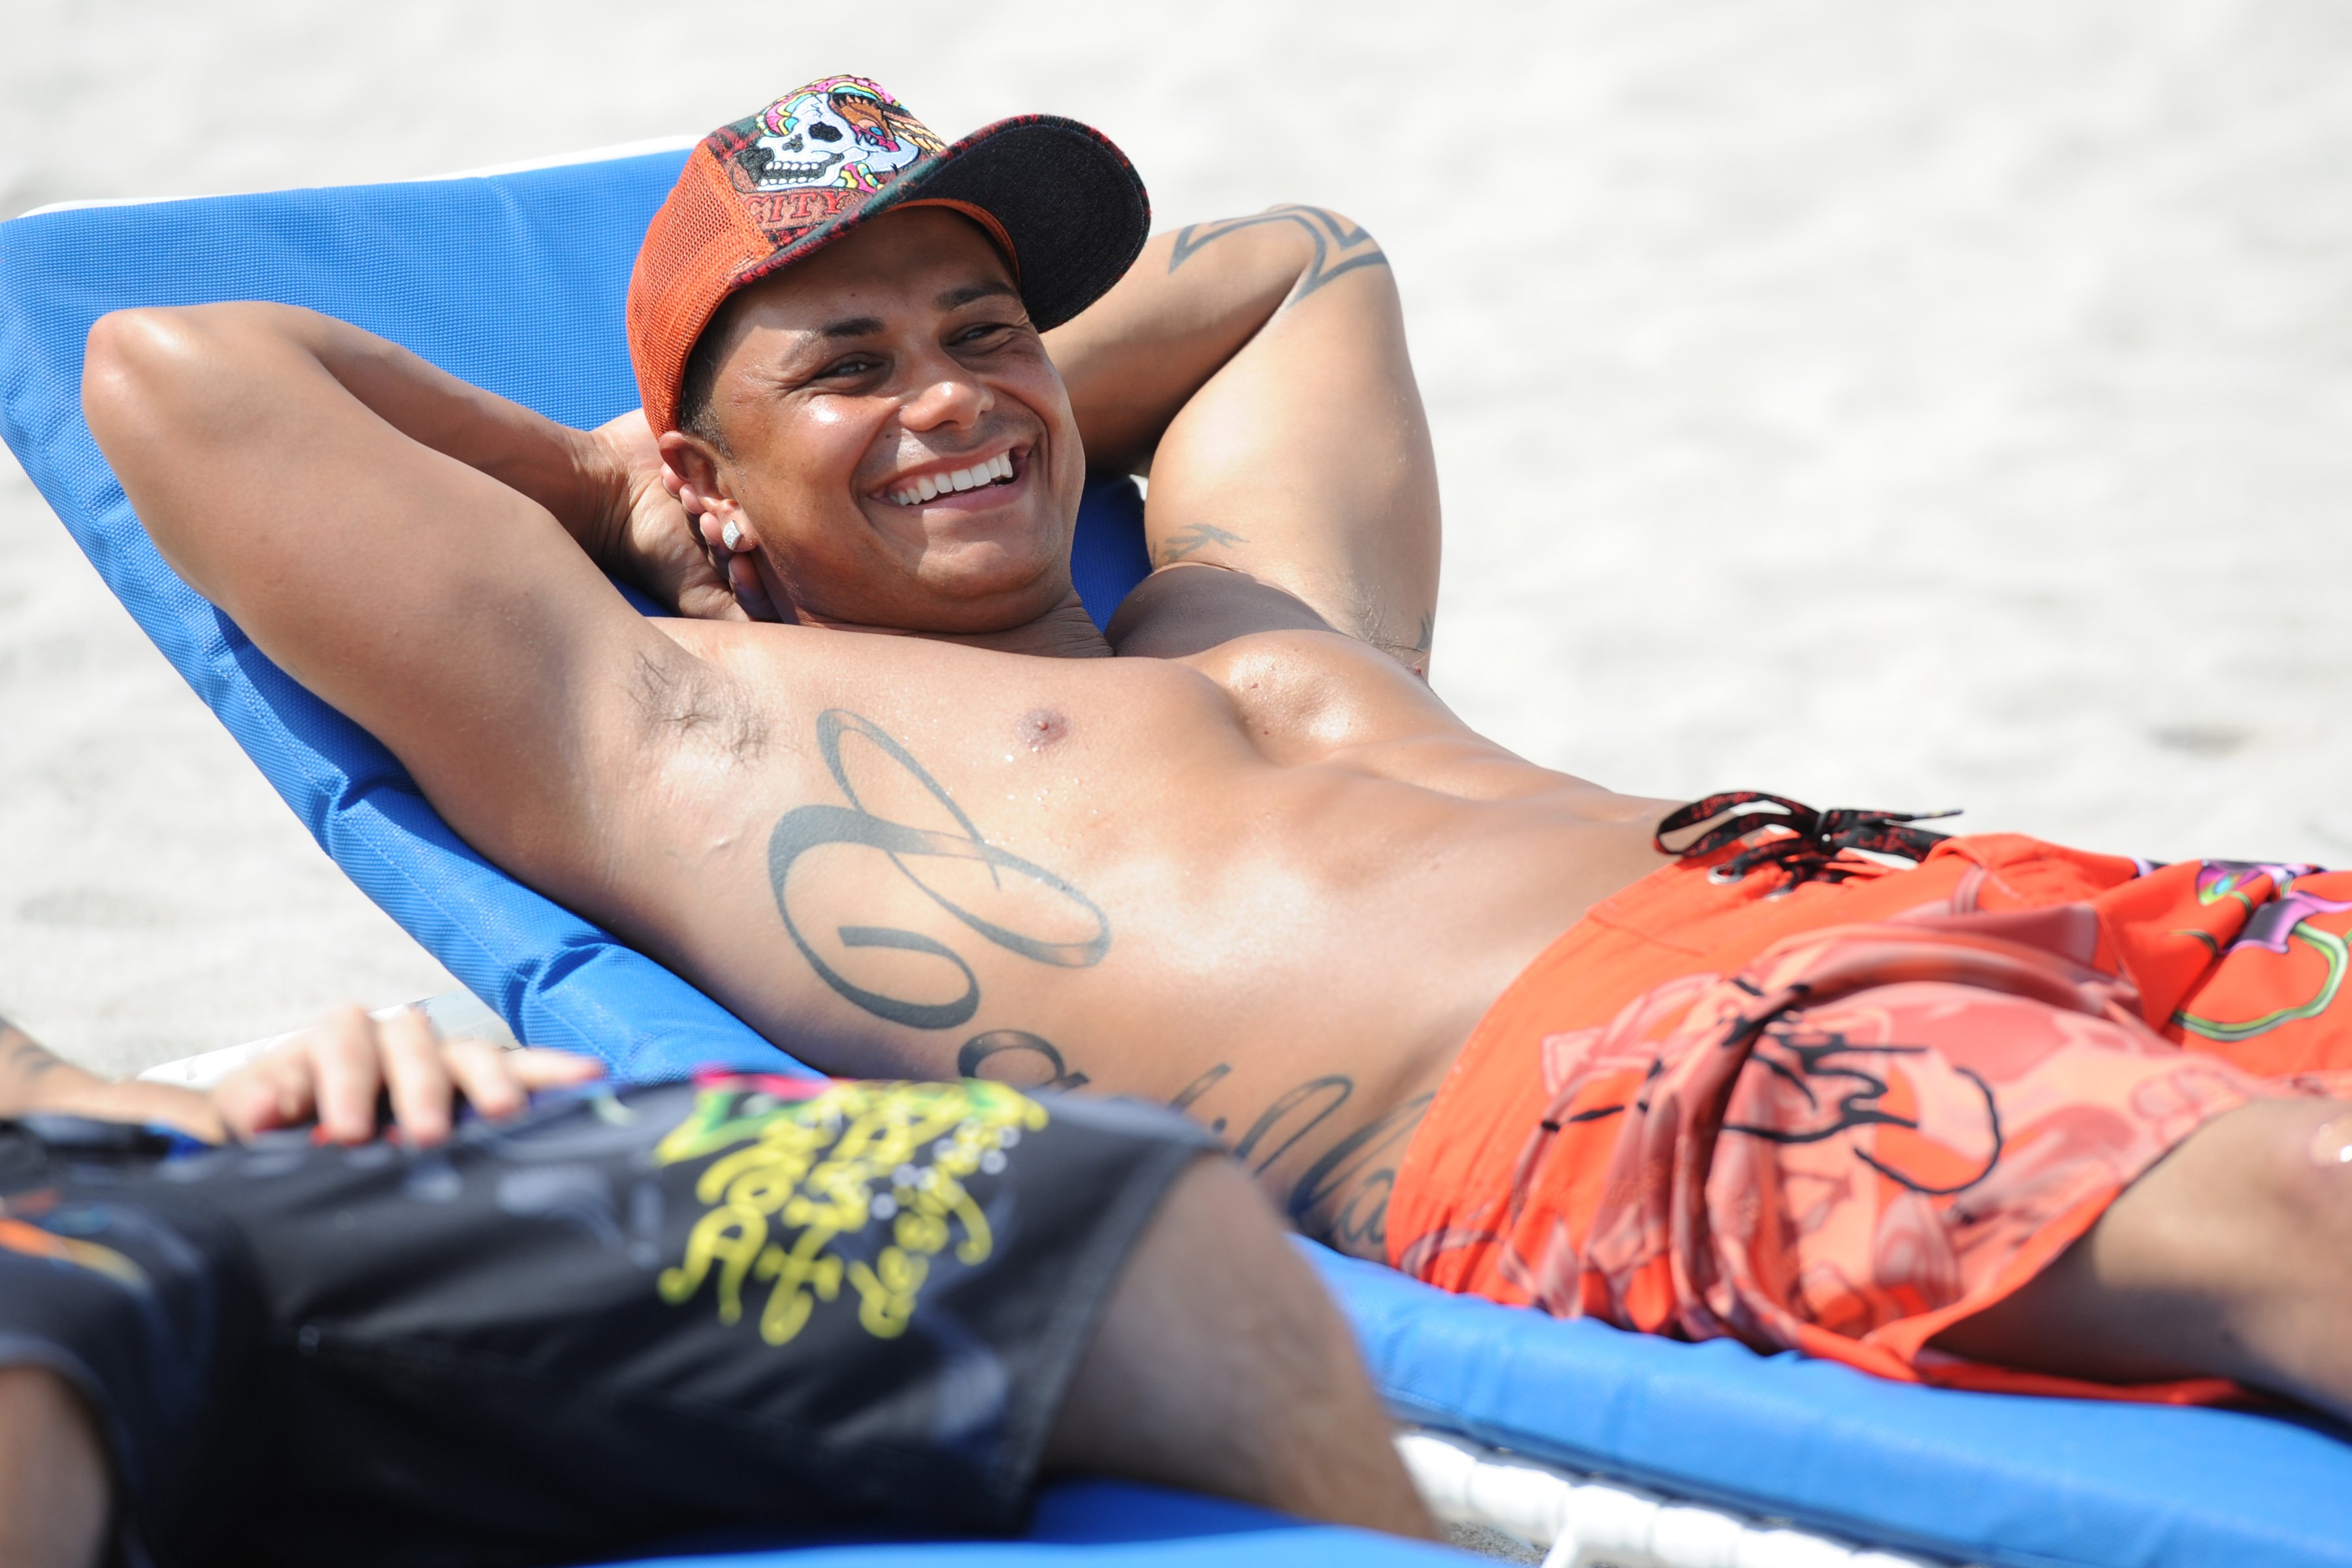 DJ Pauly DelVecchio lounging on the beach during the Miami season of 'Jersey Shore'